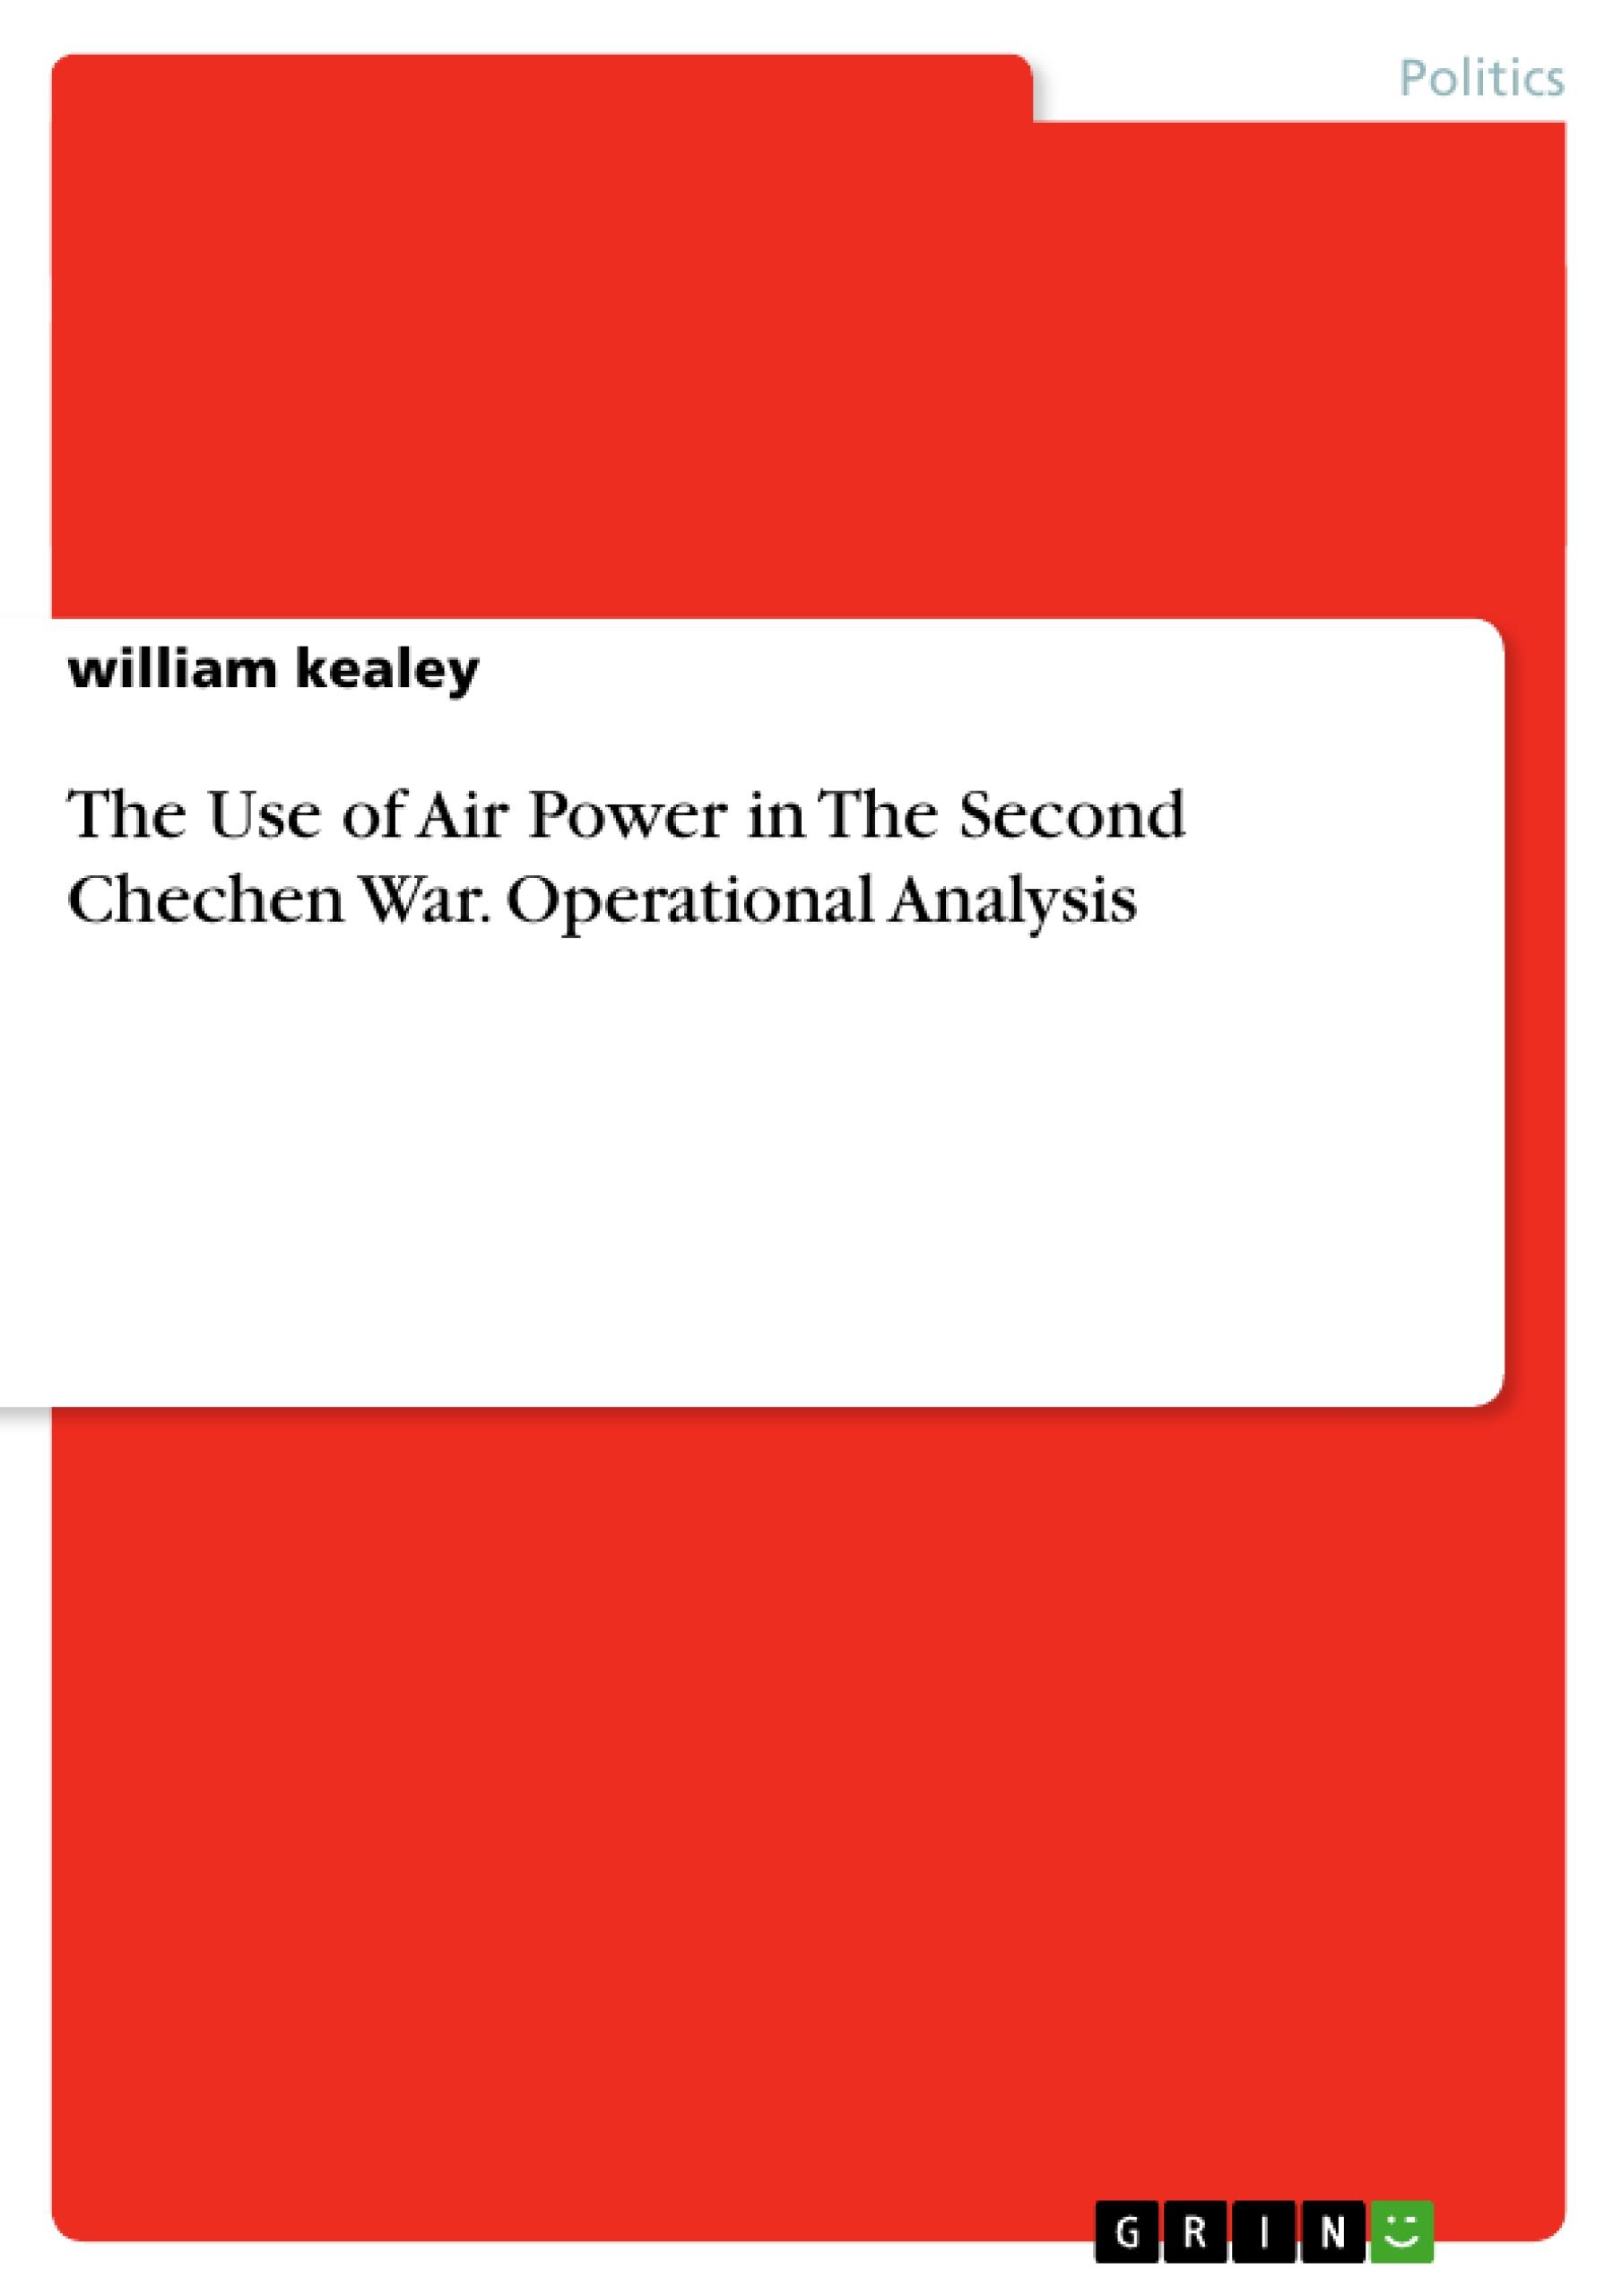 The Use of Air Power in The Second Chechen War. Operational Analysis - Kealey, William